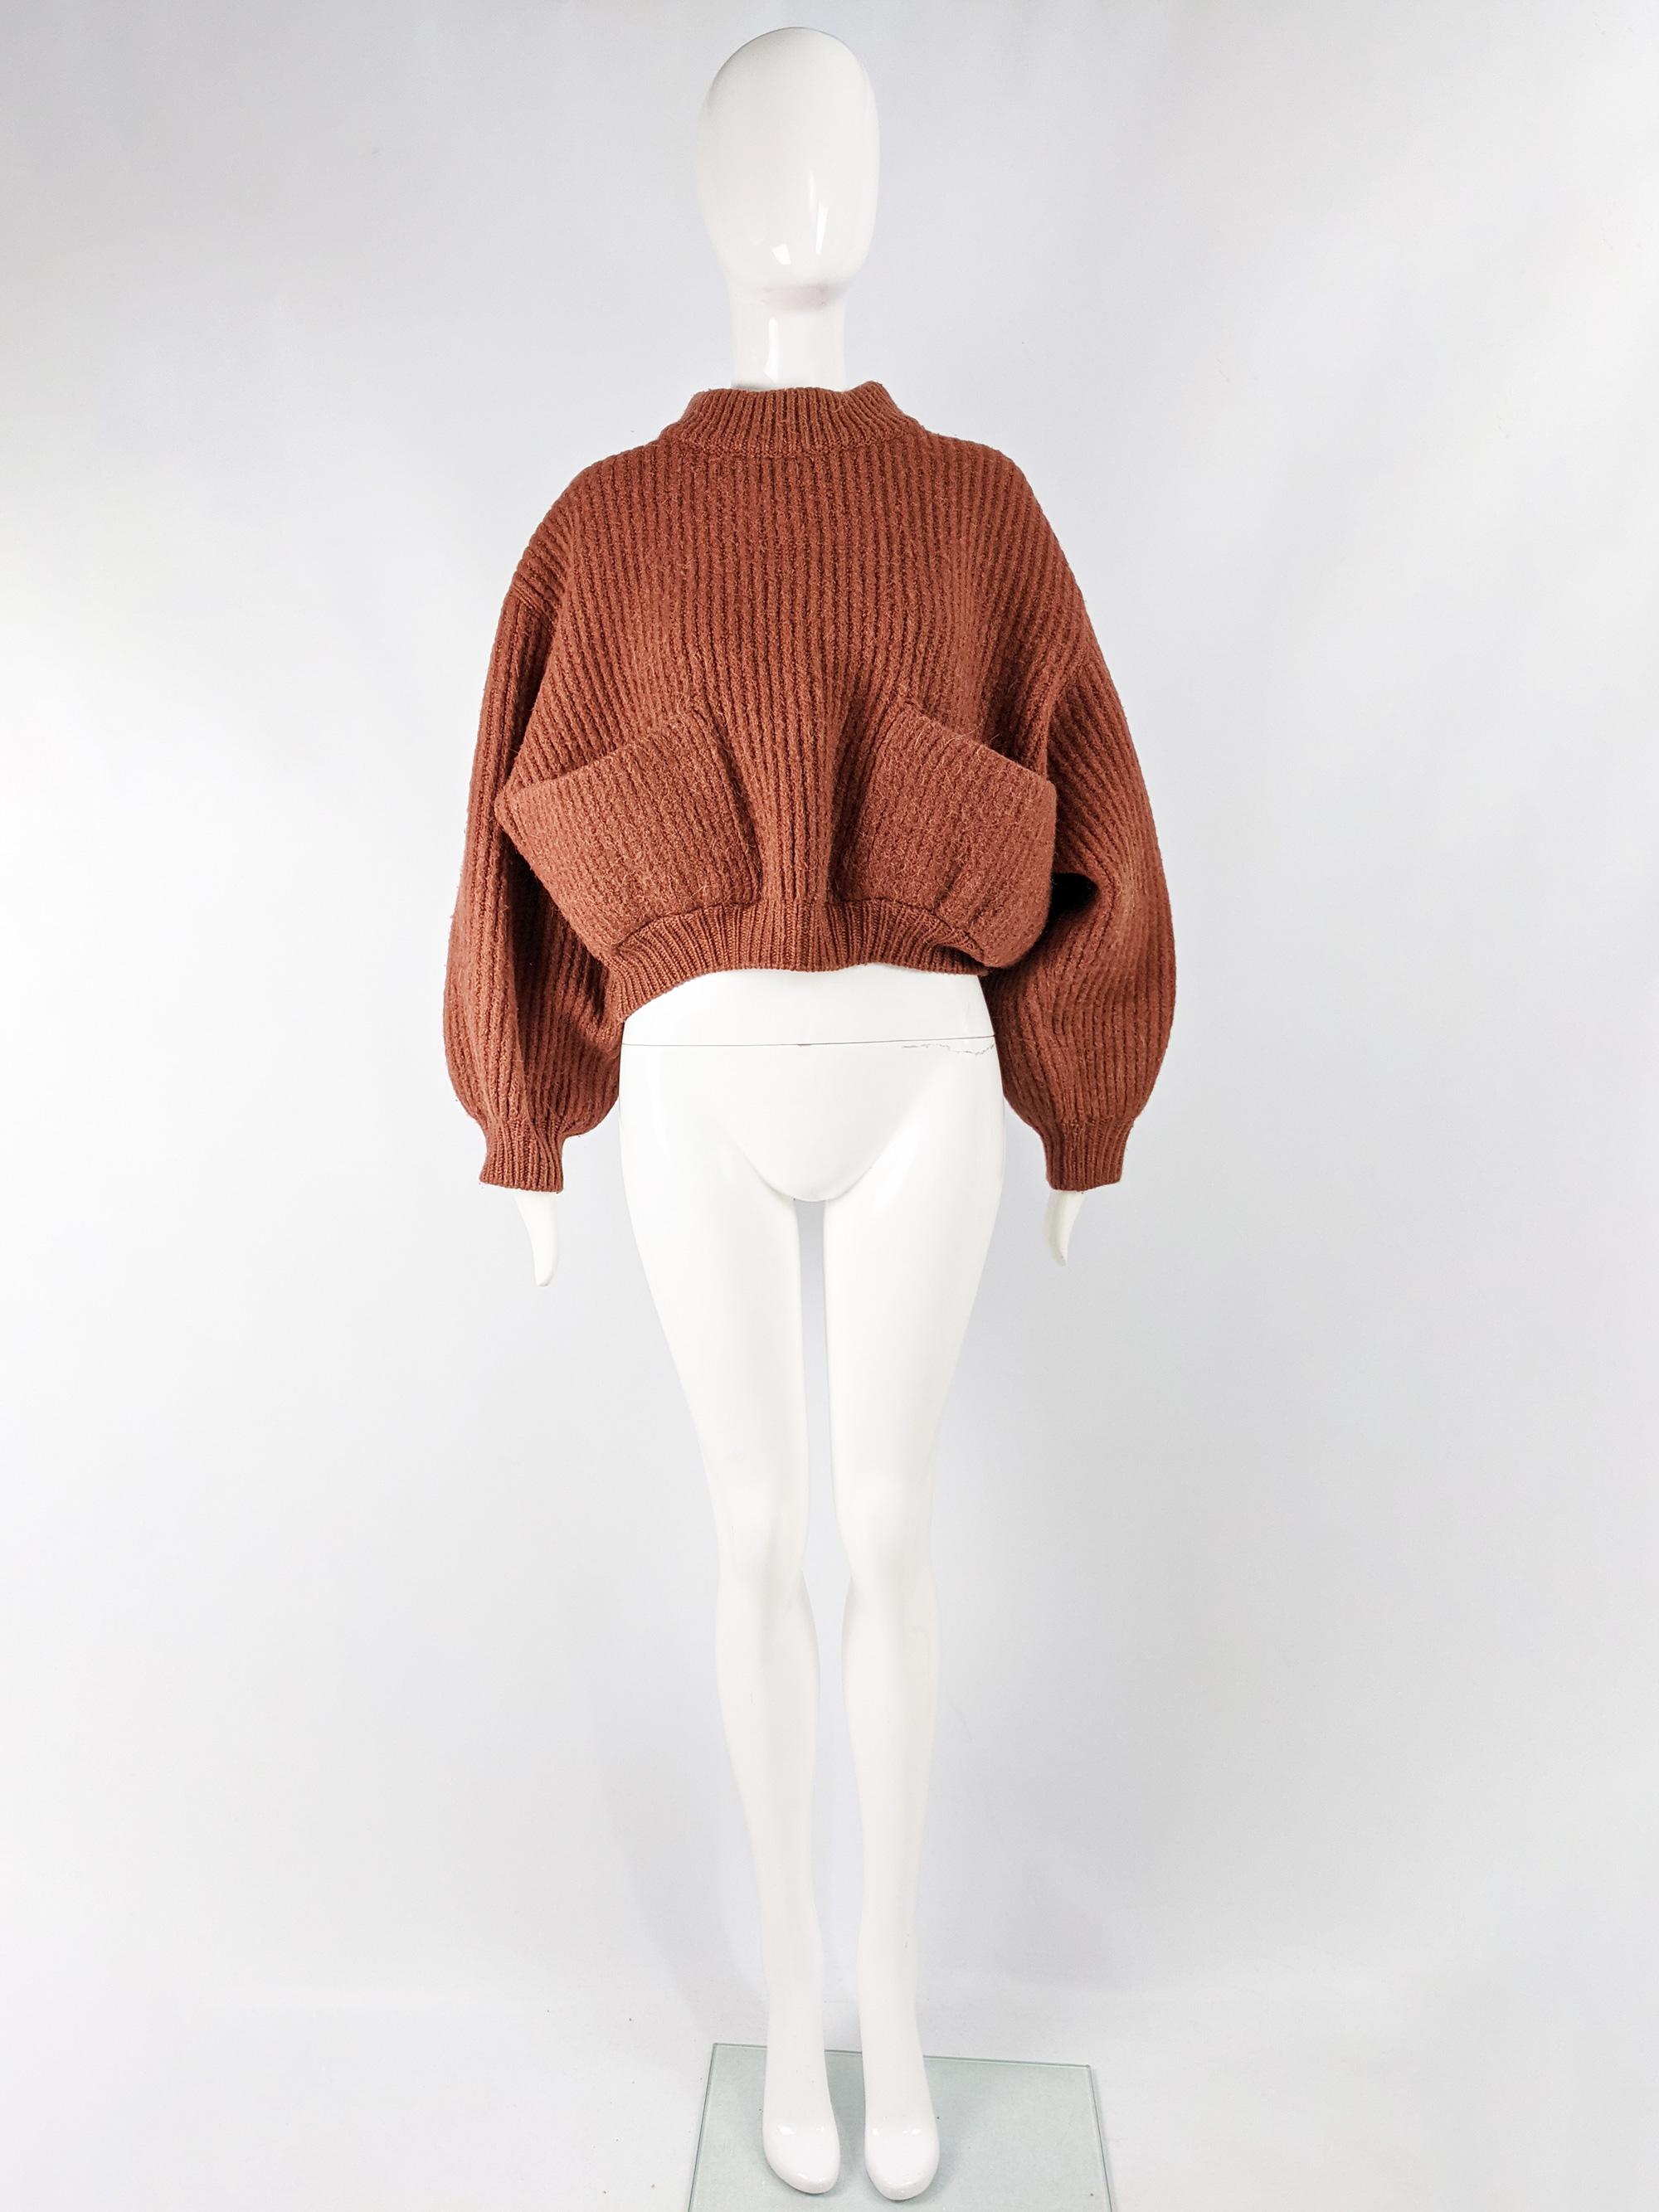 A rare and chic vintage womens Azzedine Alaia cropped jumper from the 1985 Autumn Winter collection. It has an amazing oversized and cropped fit with dropped shoulder seams and patch pockets.

Size: Unlabelled; One size fits most due to oversized